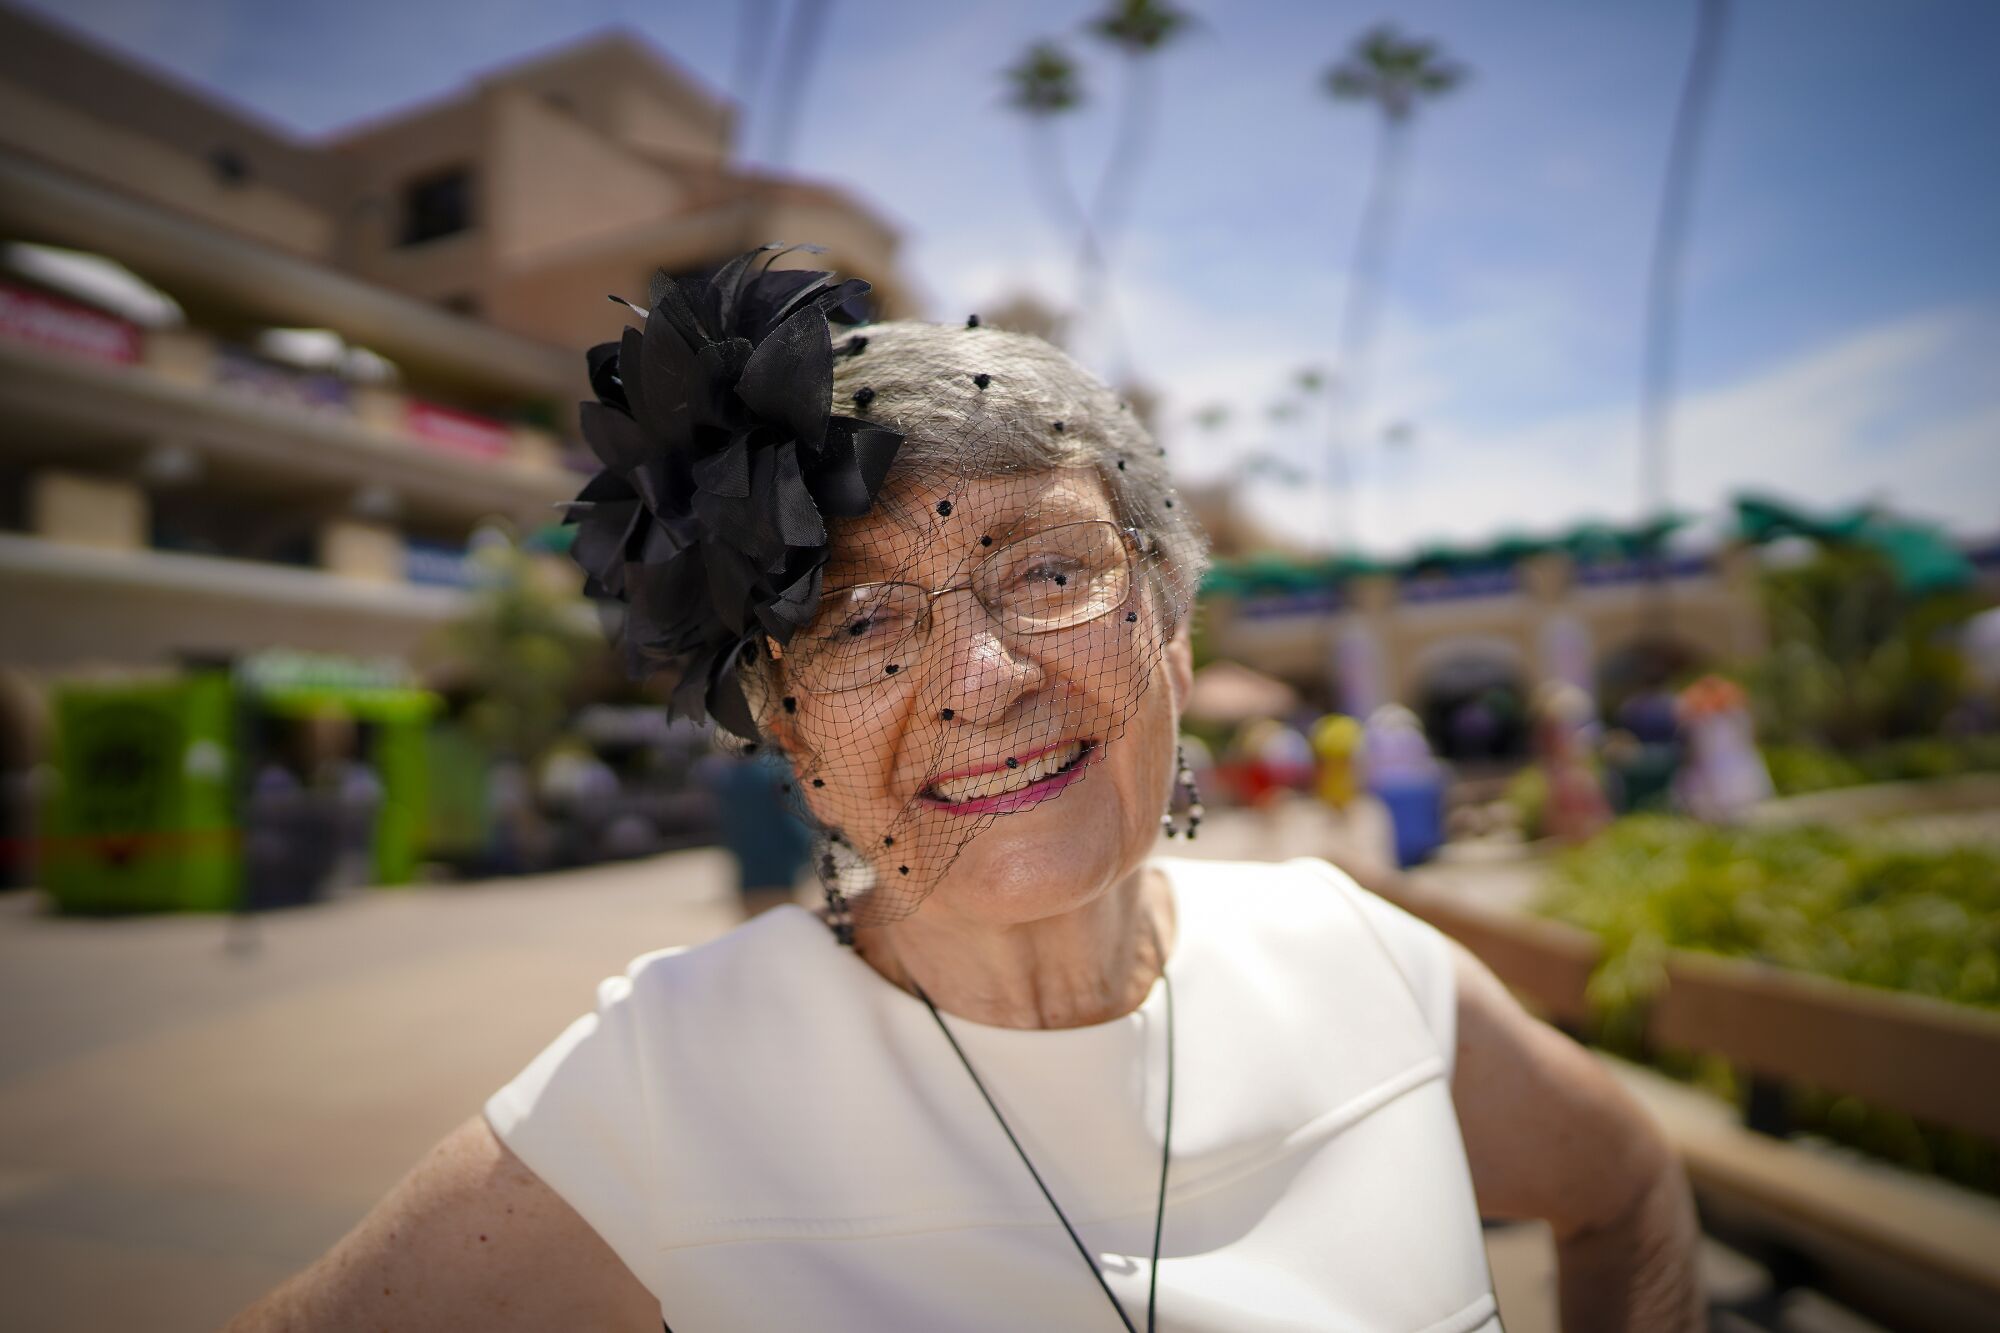 Sue Hensley from El Cajon was among the race fans taking part in the tradition of wearing hats on opening day.